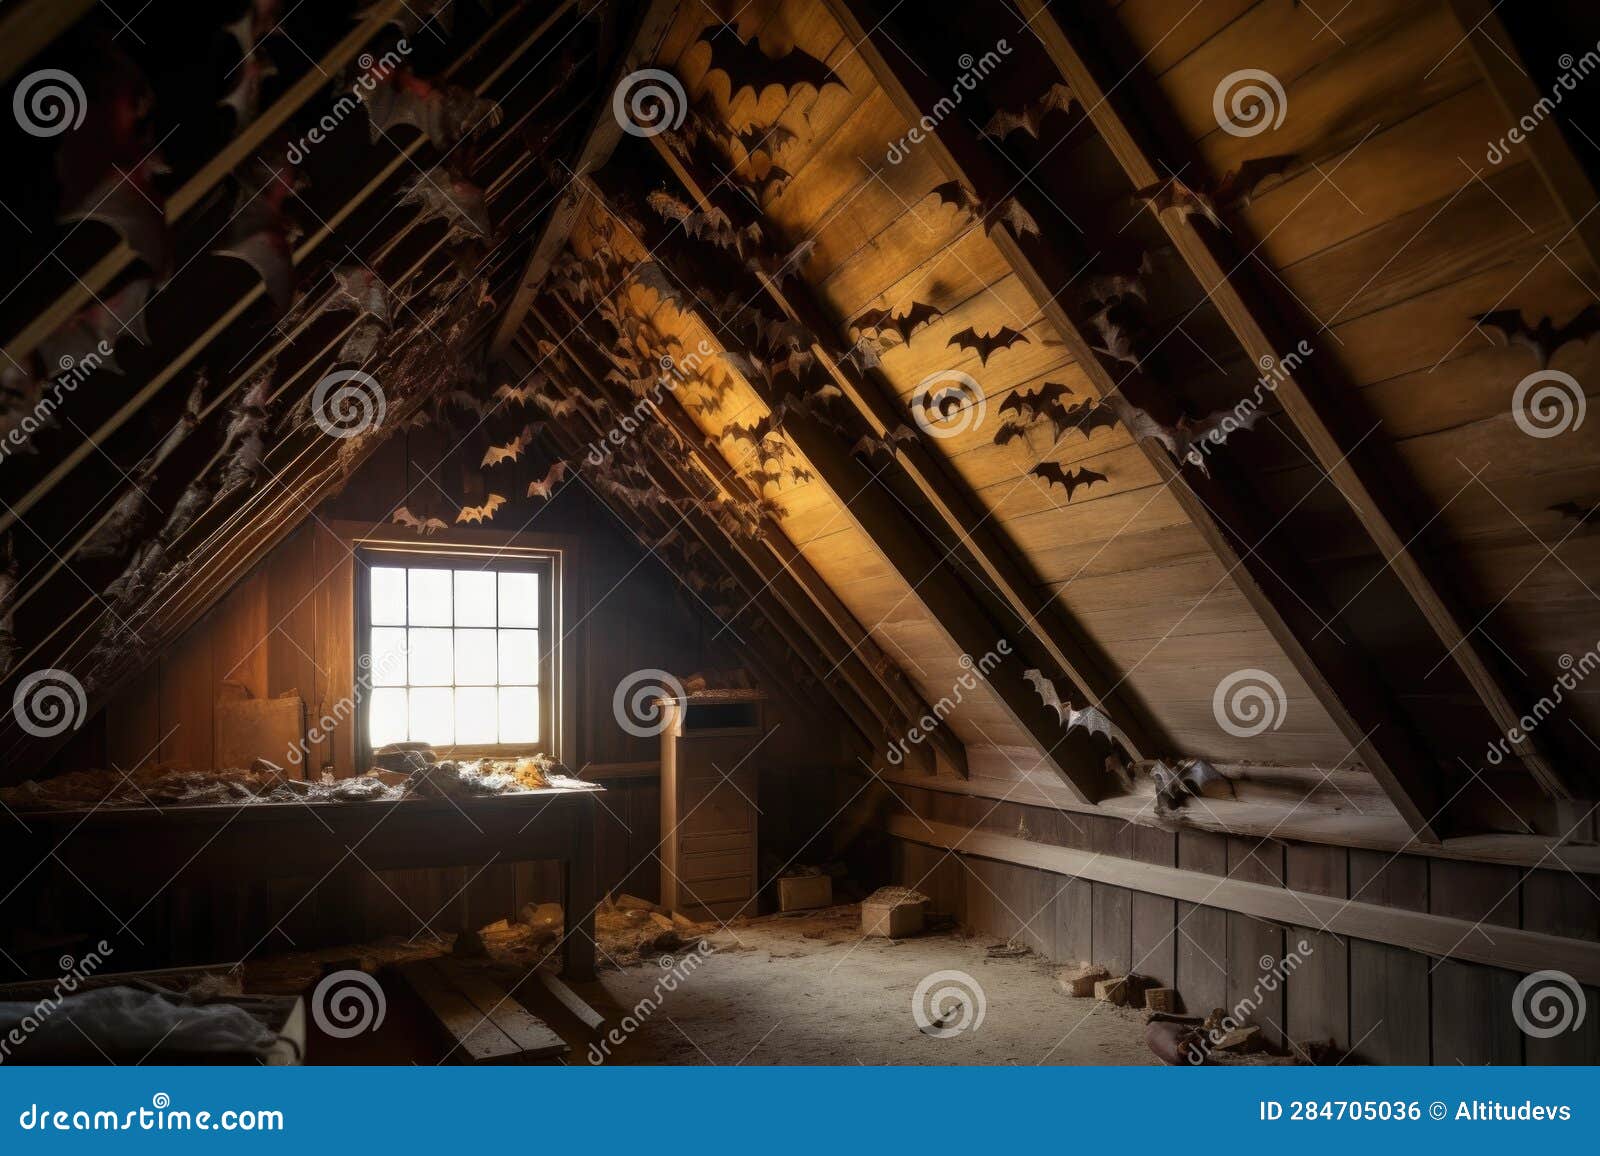 bats roosting in the attics eaves and corners